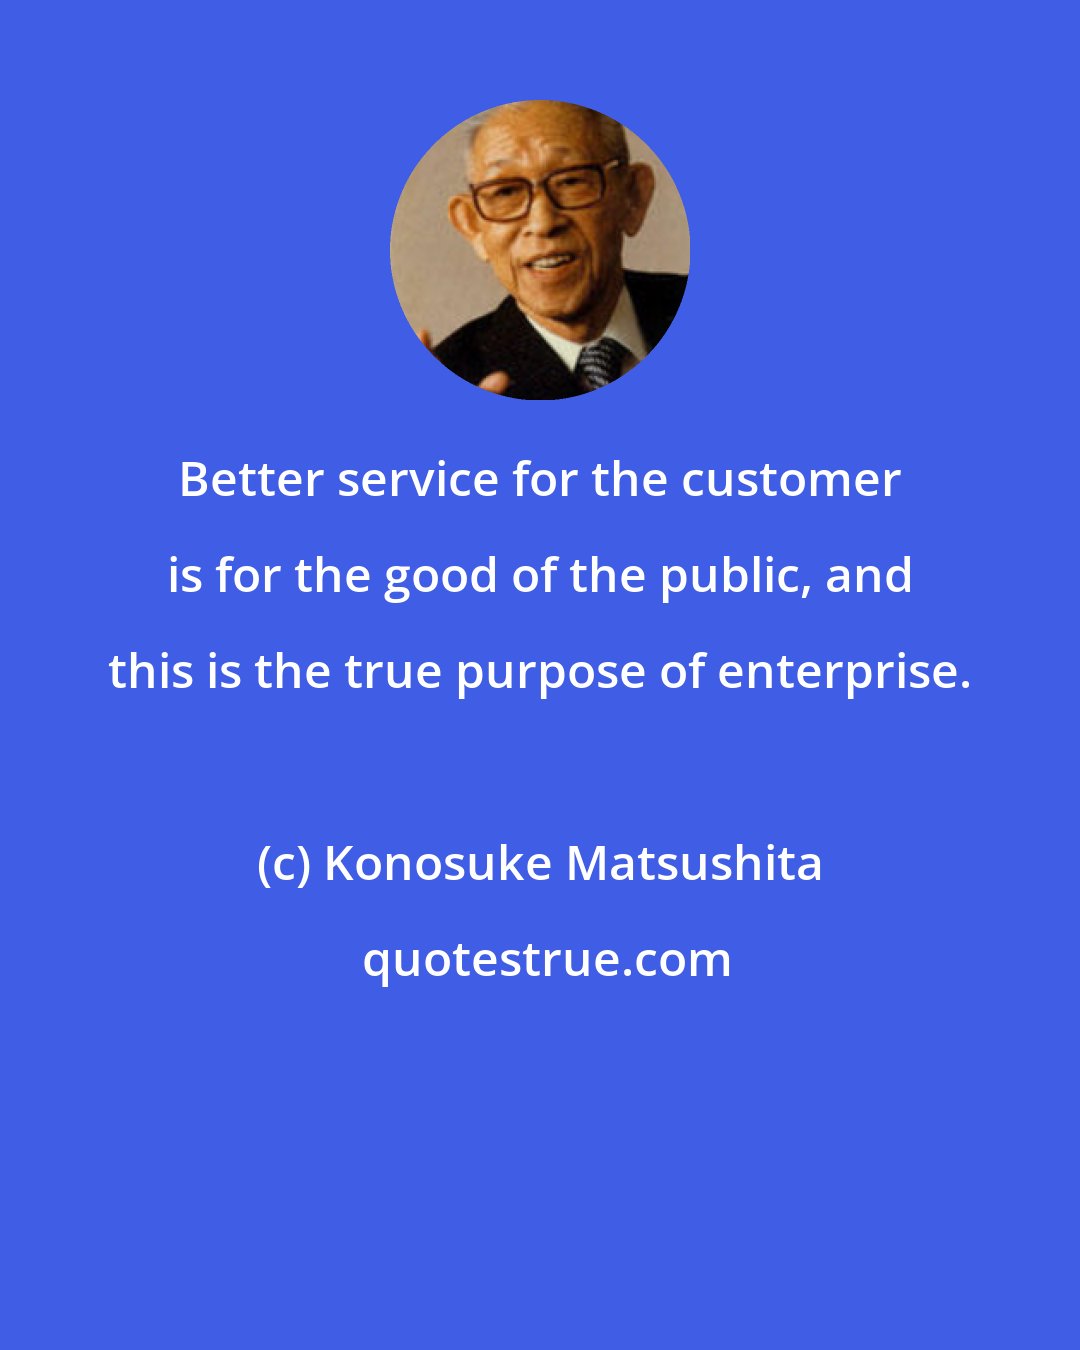 Konosuke Matsushita: Better service for the customer is for the good of the public, and this is the true purpose of enterprise.